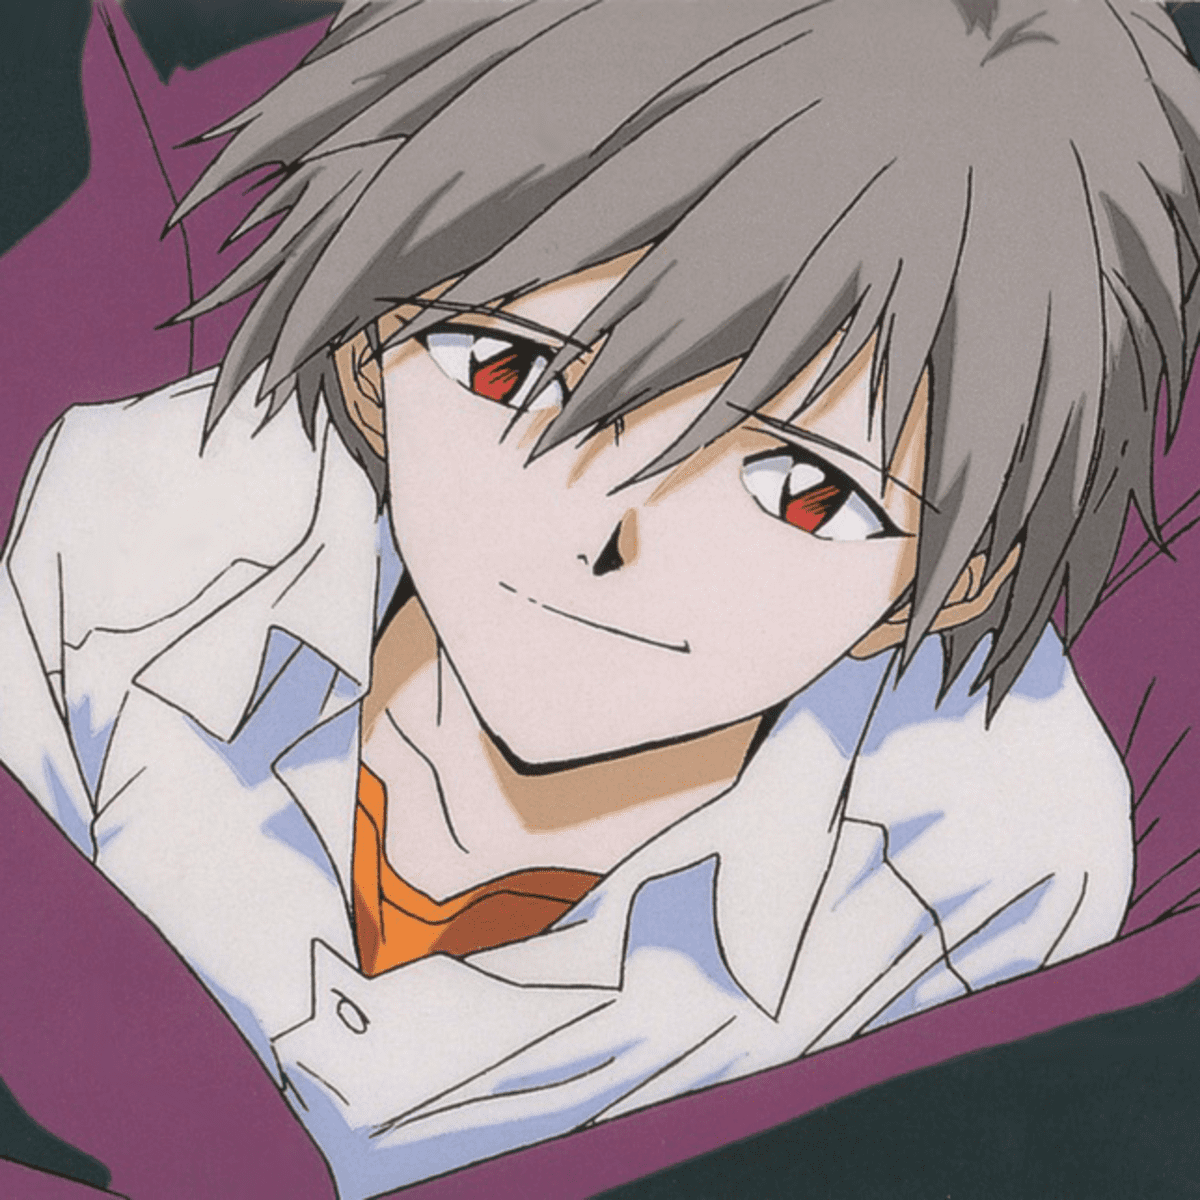 Shinji's Relationships In Evangelion, Ranked By Healthiness